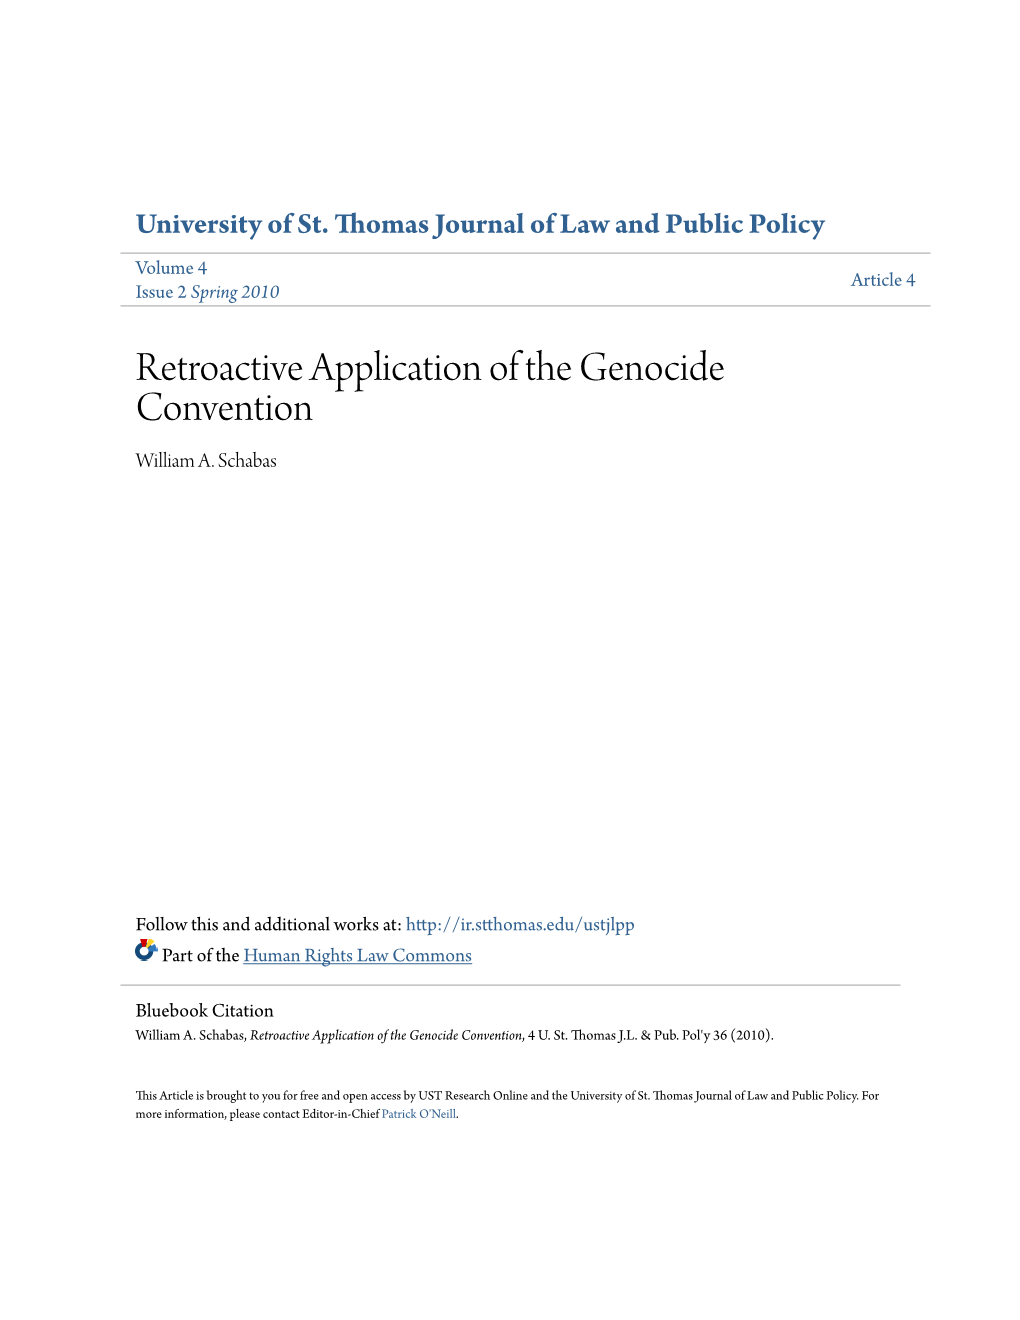 Retroactive Application of the Genocide Convention William A